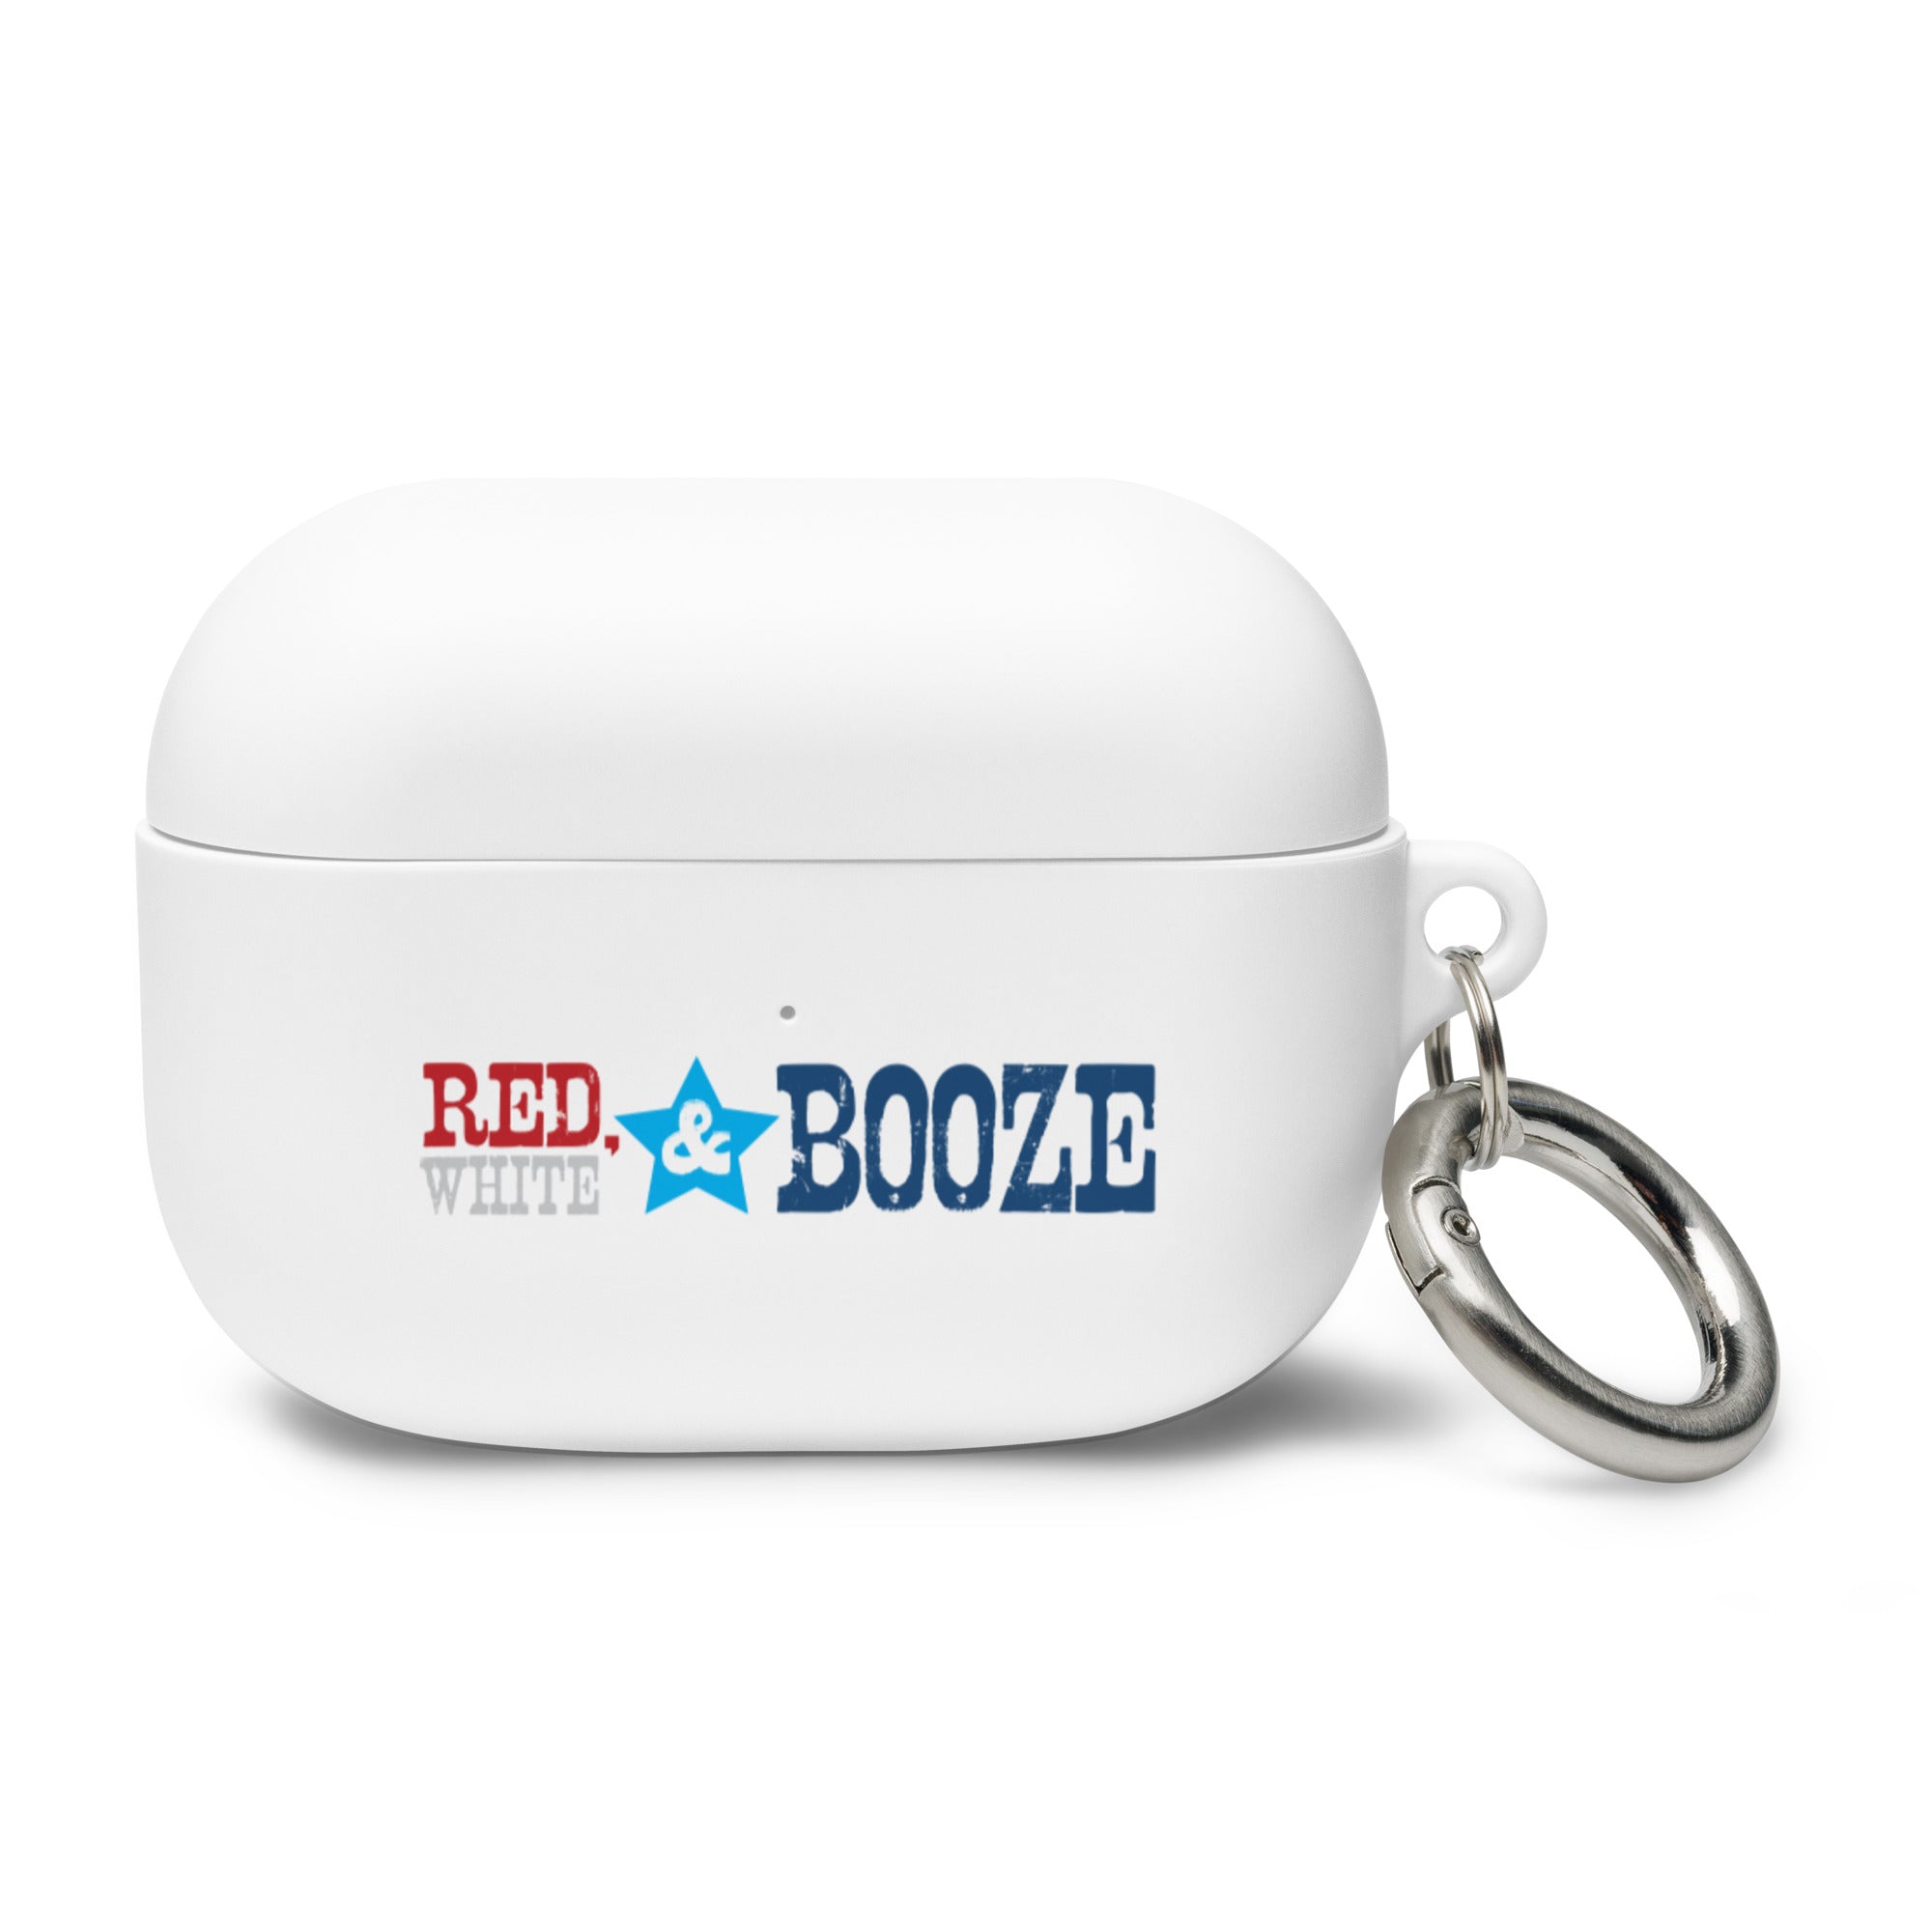 Red White & Booze: AirPods® Case Cover